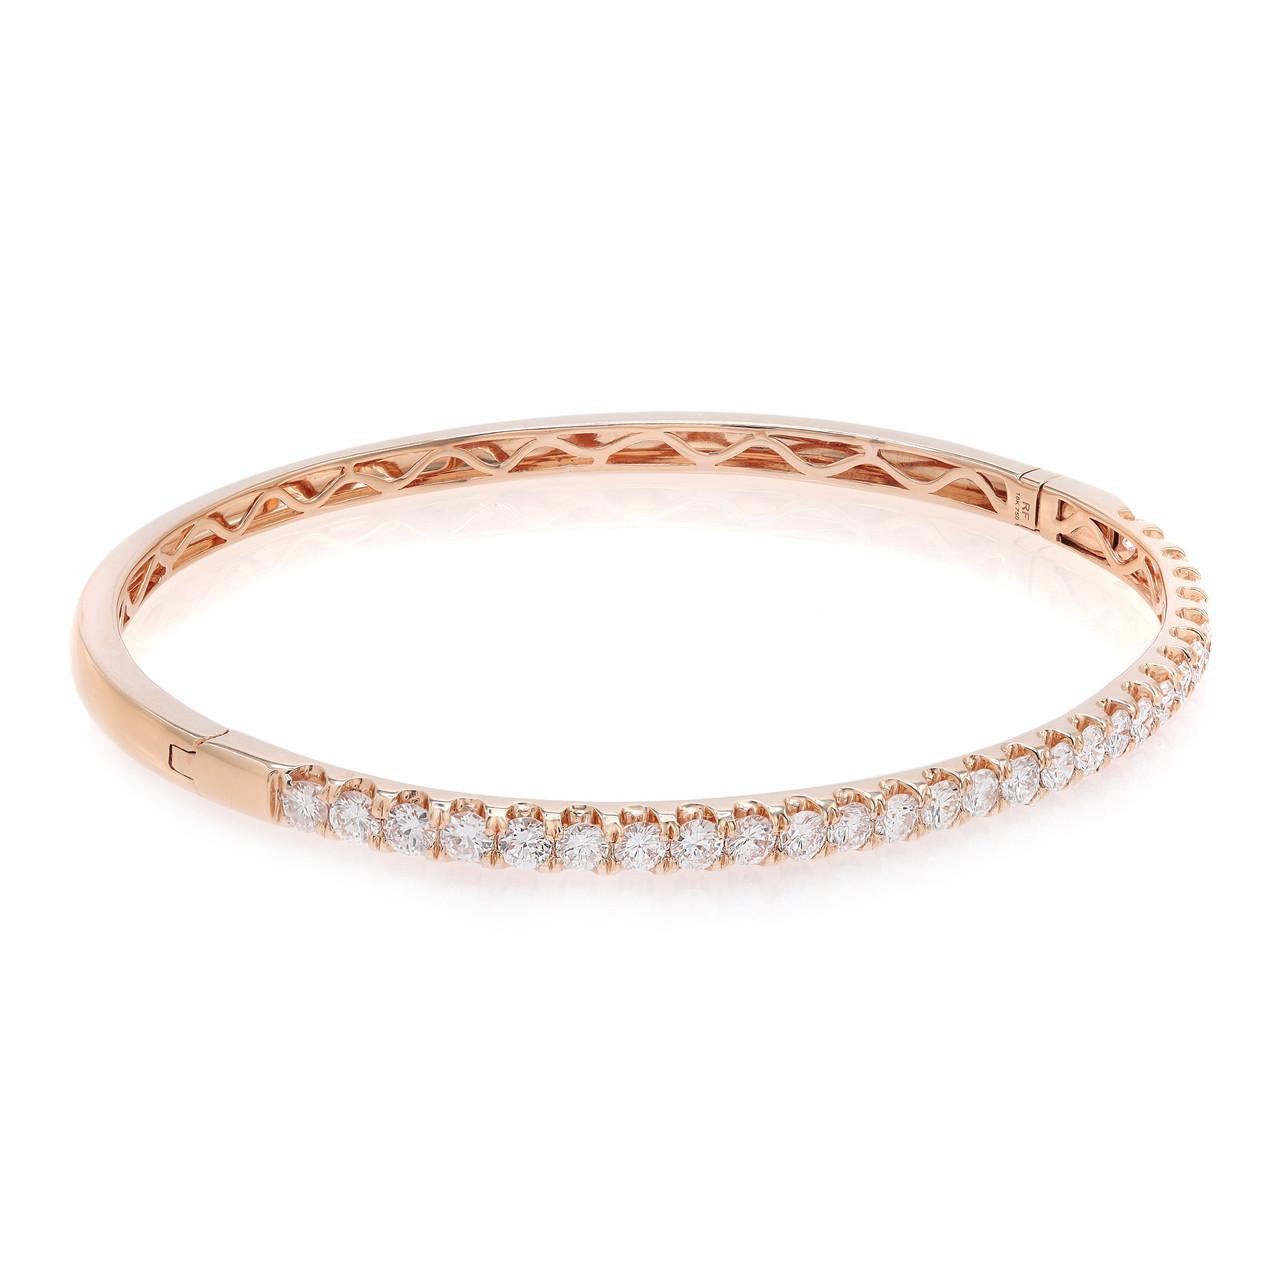 Introducing the versatile and elegant diamond bangle, a true embodiment of modern sophistication. Crafted with precision, this chic piece showcases over two carats of brilliant round diamonds, delicately pavé set in 18k rose gold. The stunning